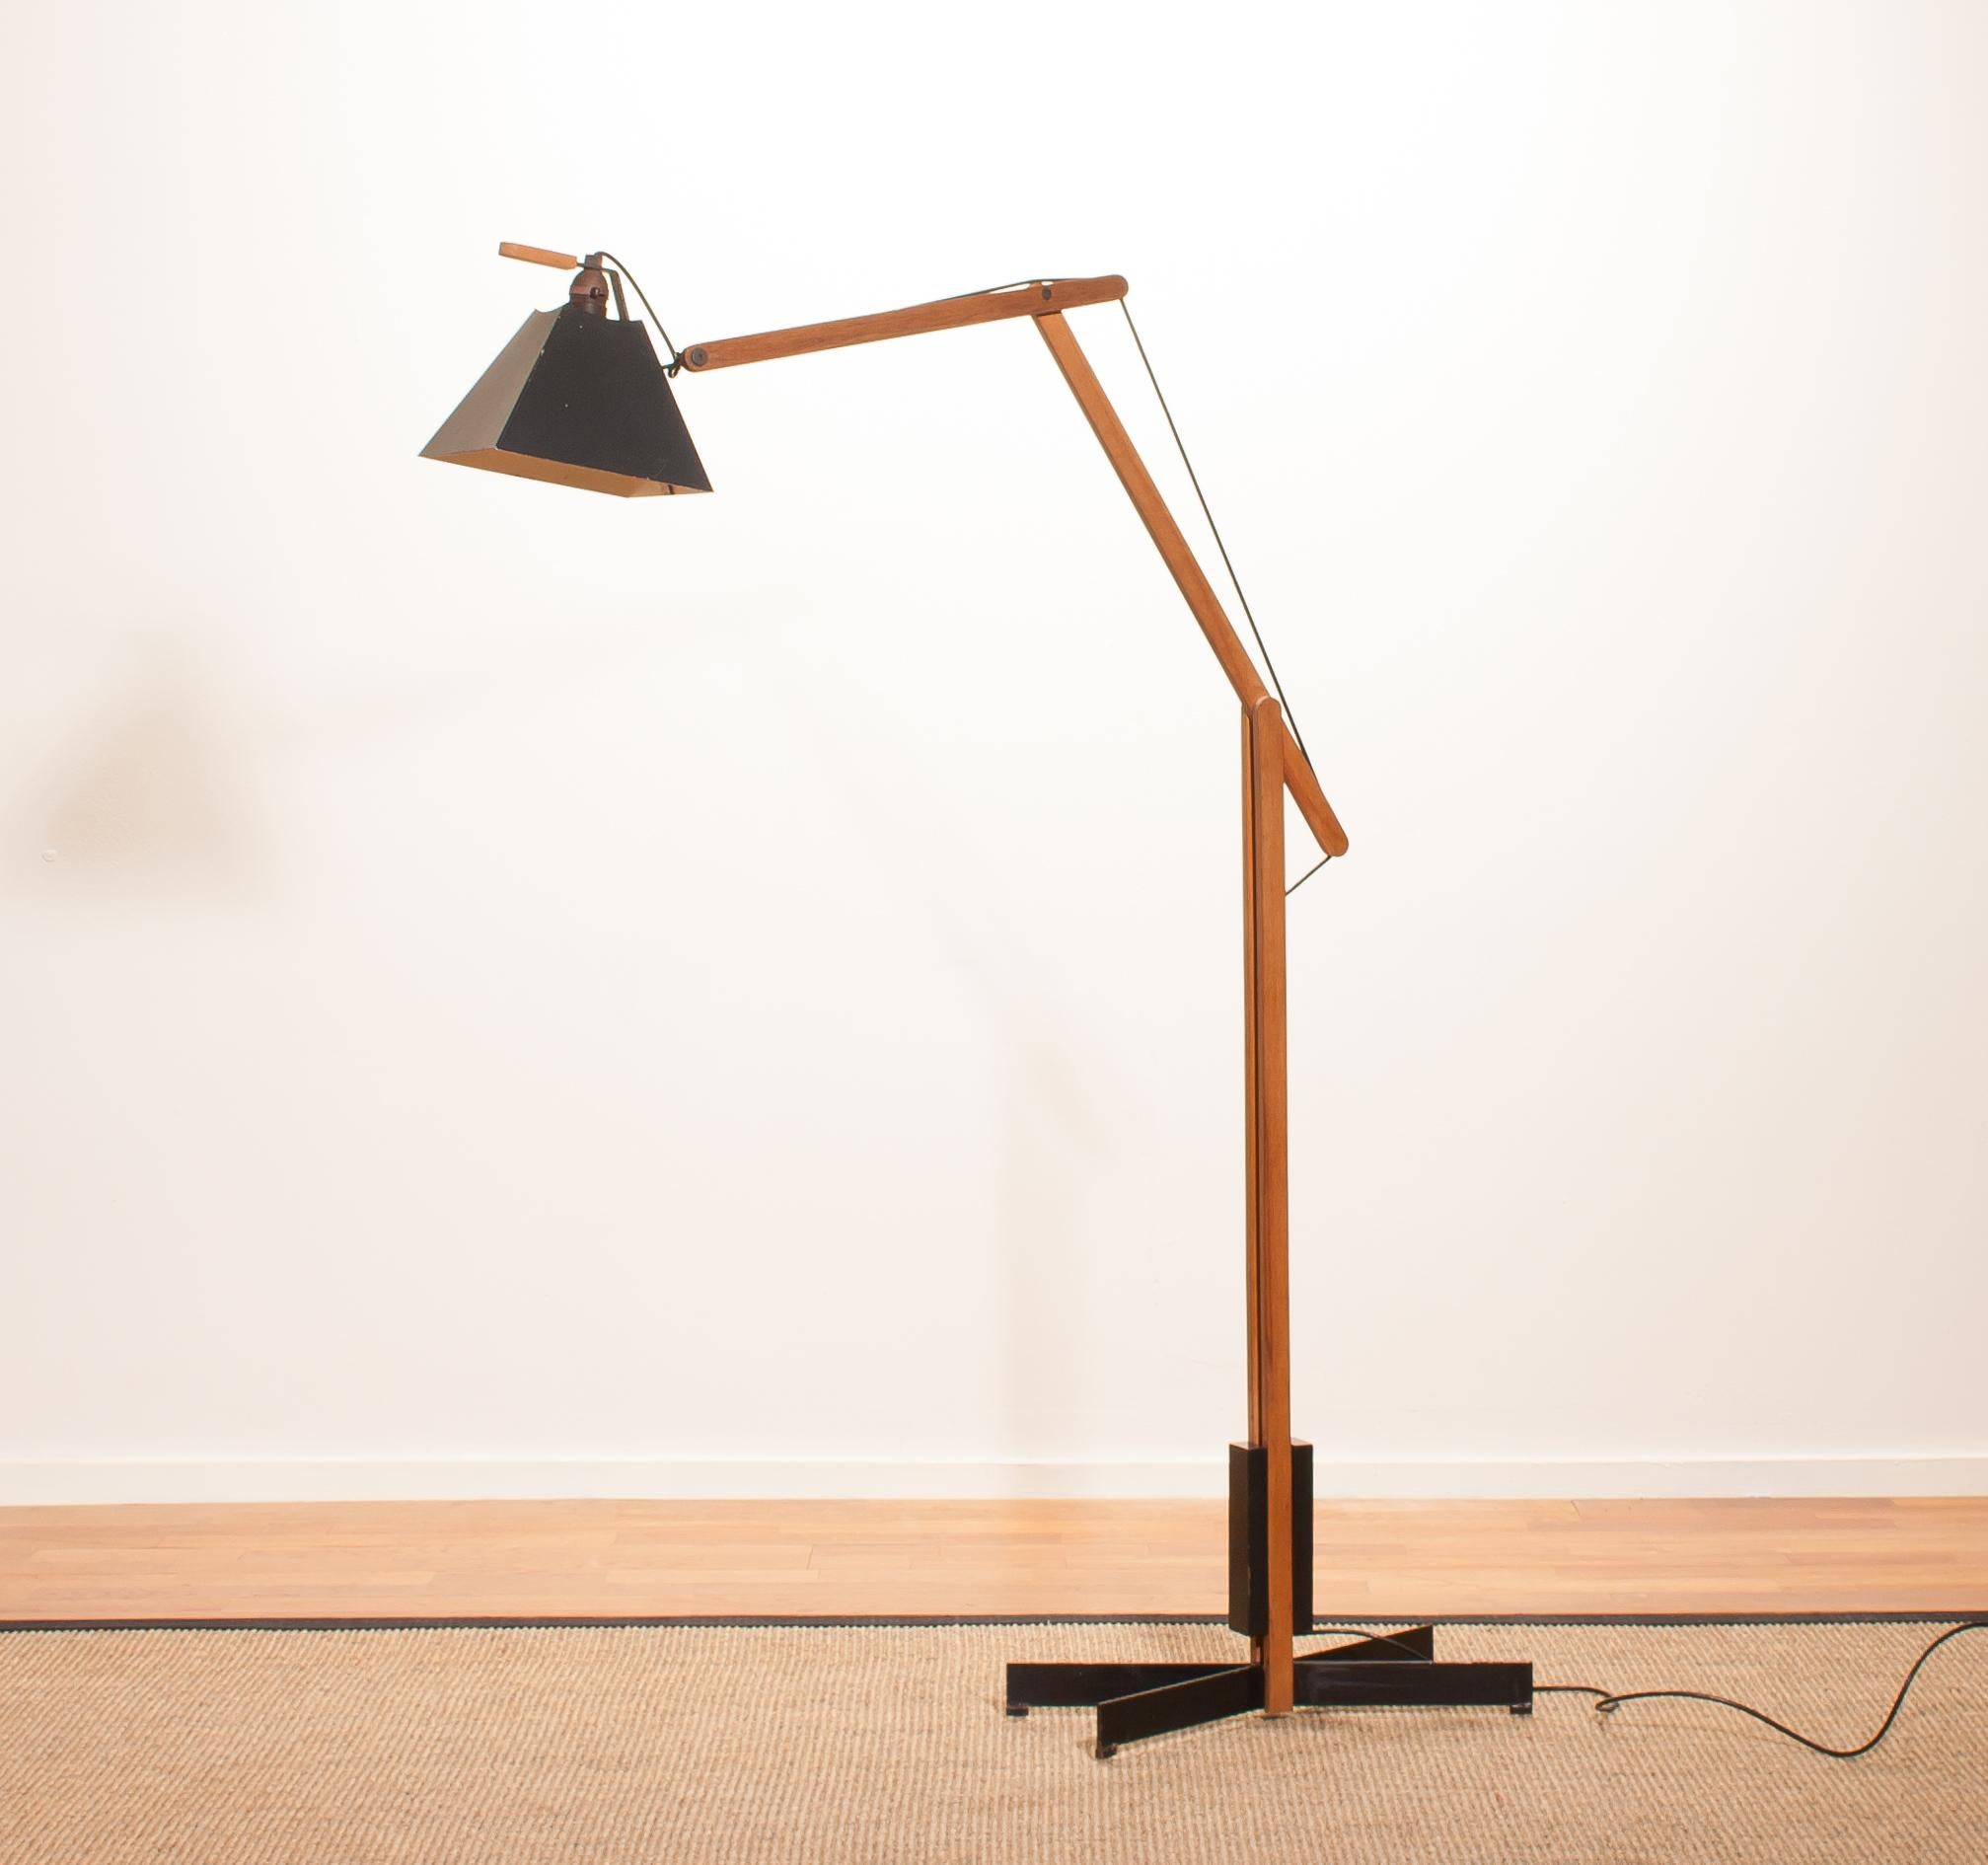 Magnificent rare floor lamps by Luxus, Sweden.
These lamps are adjustable by a counterbalance.
The stands are made of teak with a black lacquered shade.
They are labeled by Luxus and are in a beautiful condition.
Period 1950s.
Dimensions: H 125